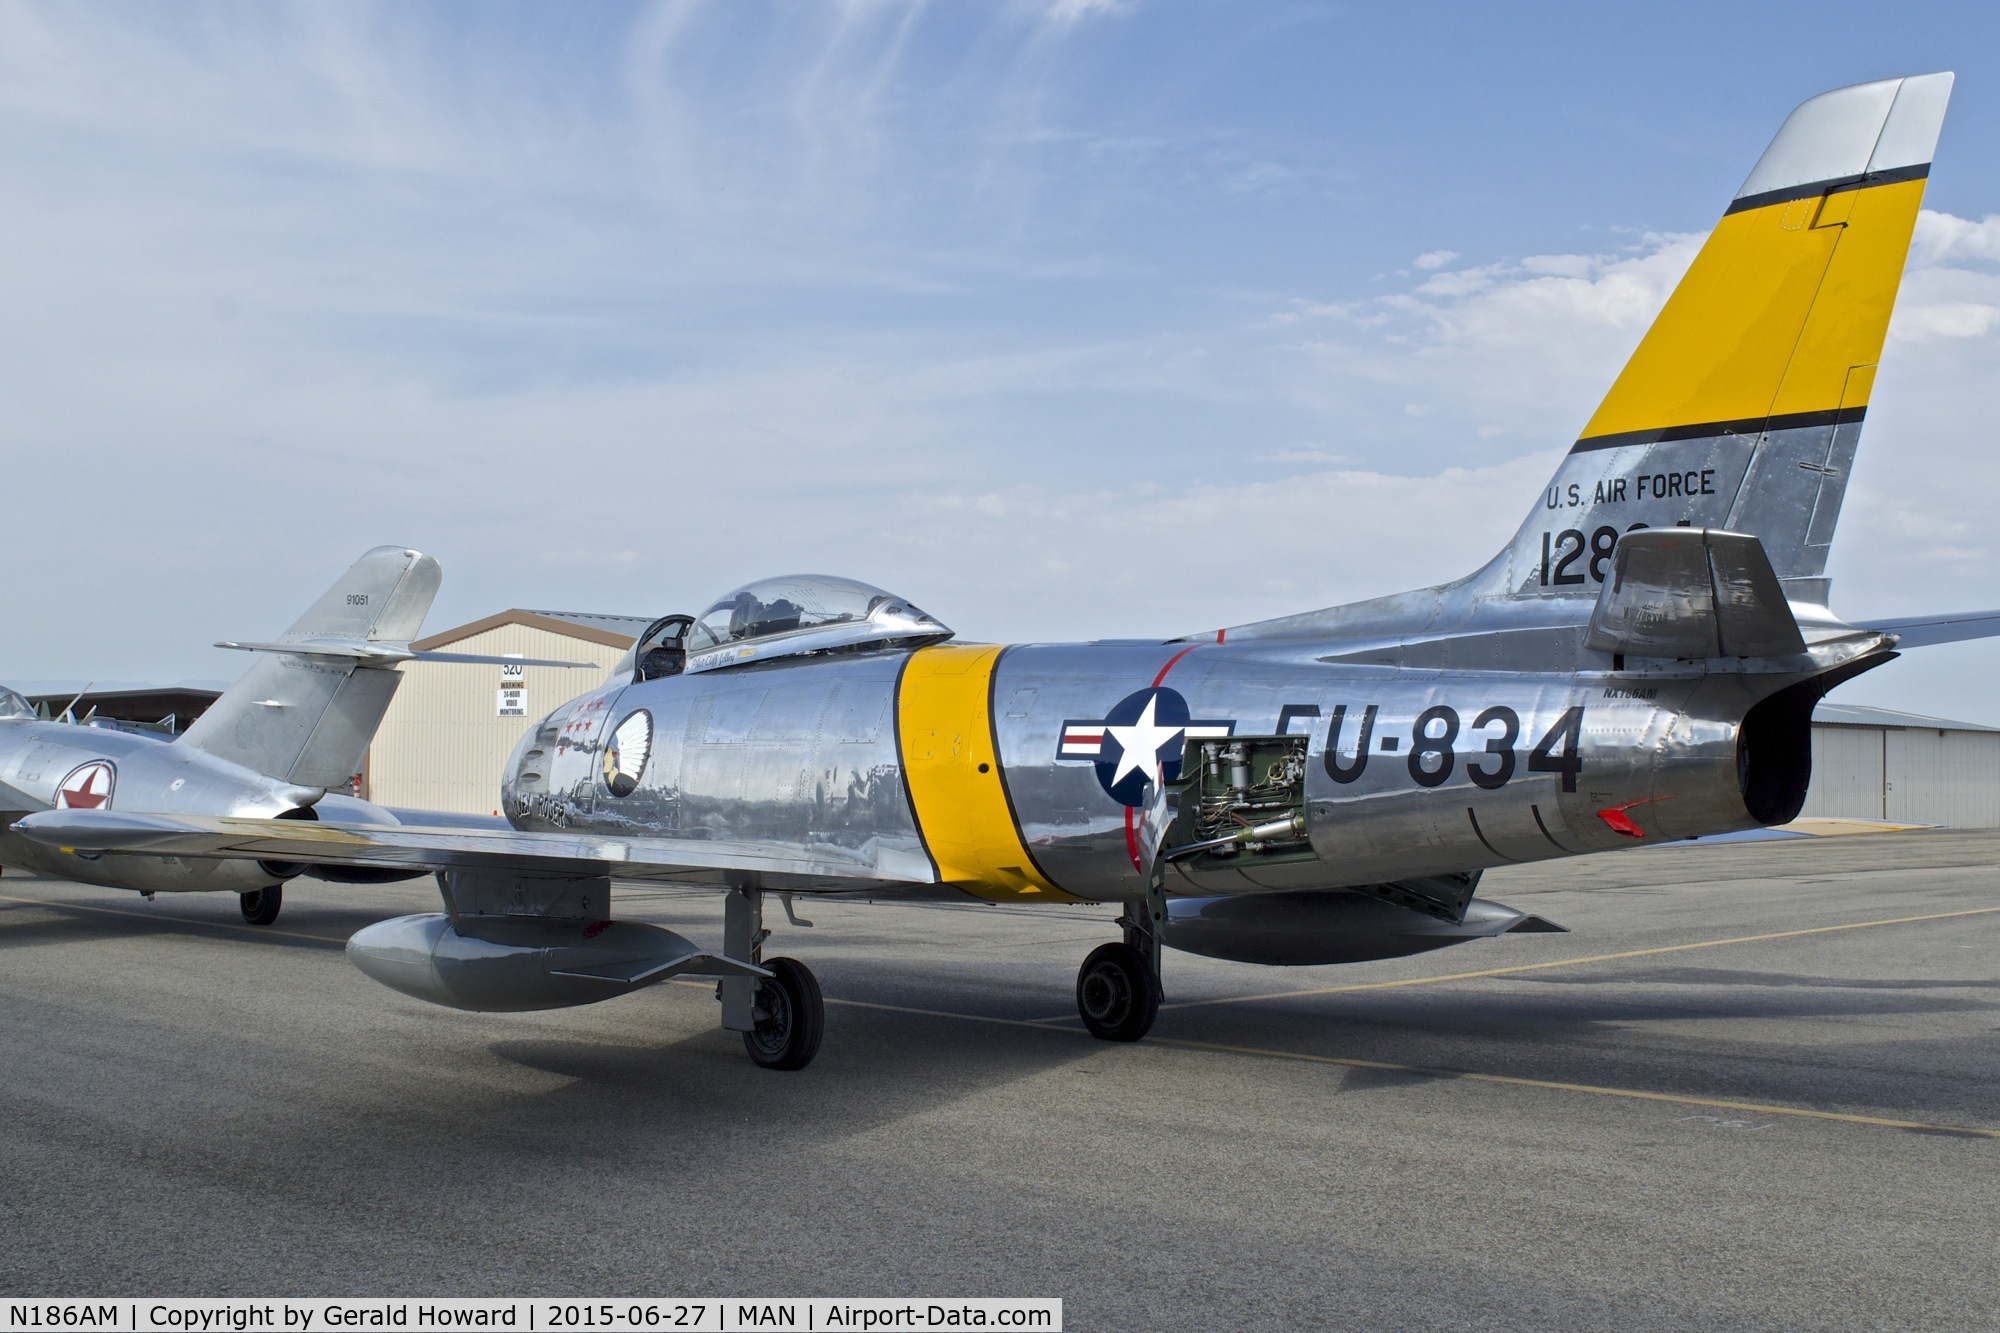 N186AM, 1952 North American F-86F Sabre C/N 191-708, On display during the air show in Nampa, Idaho.